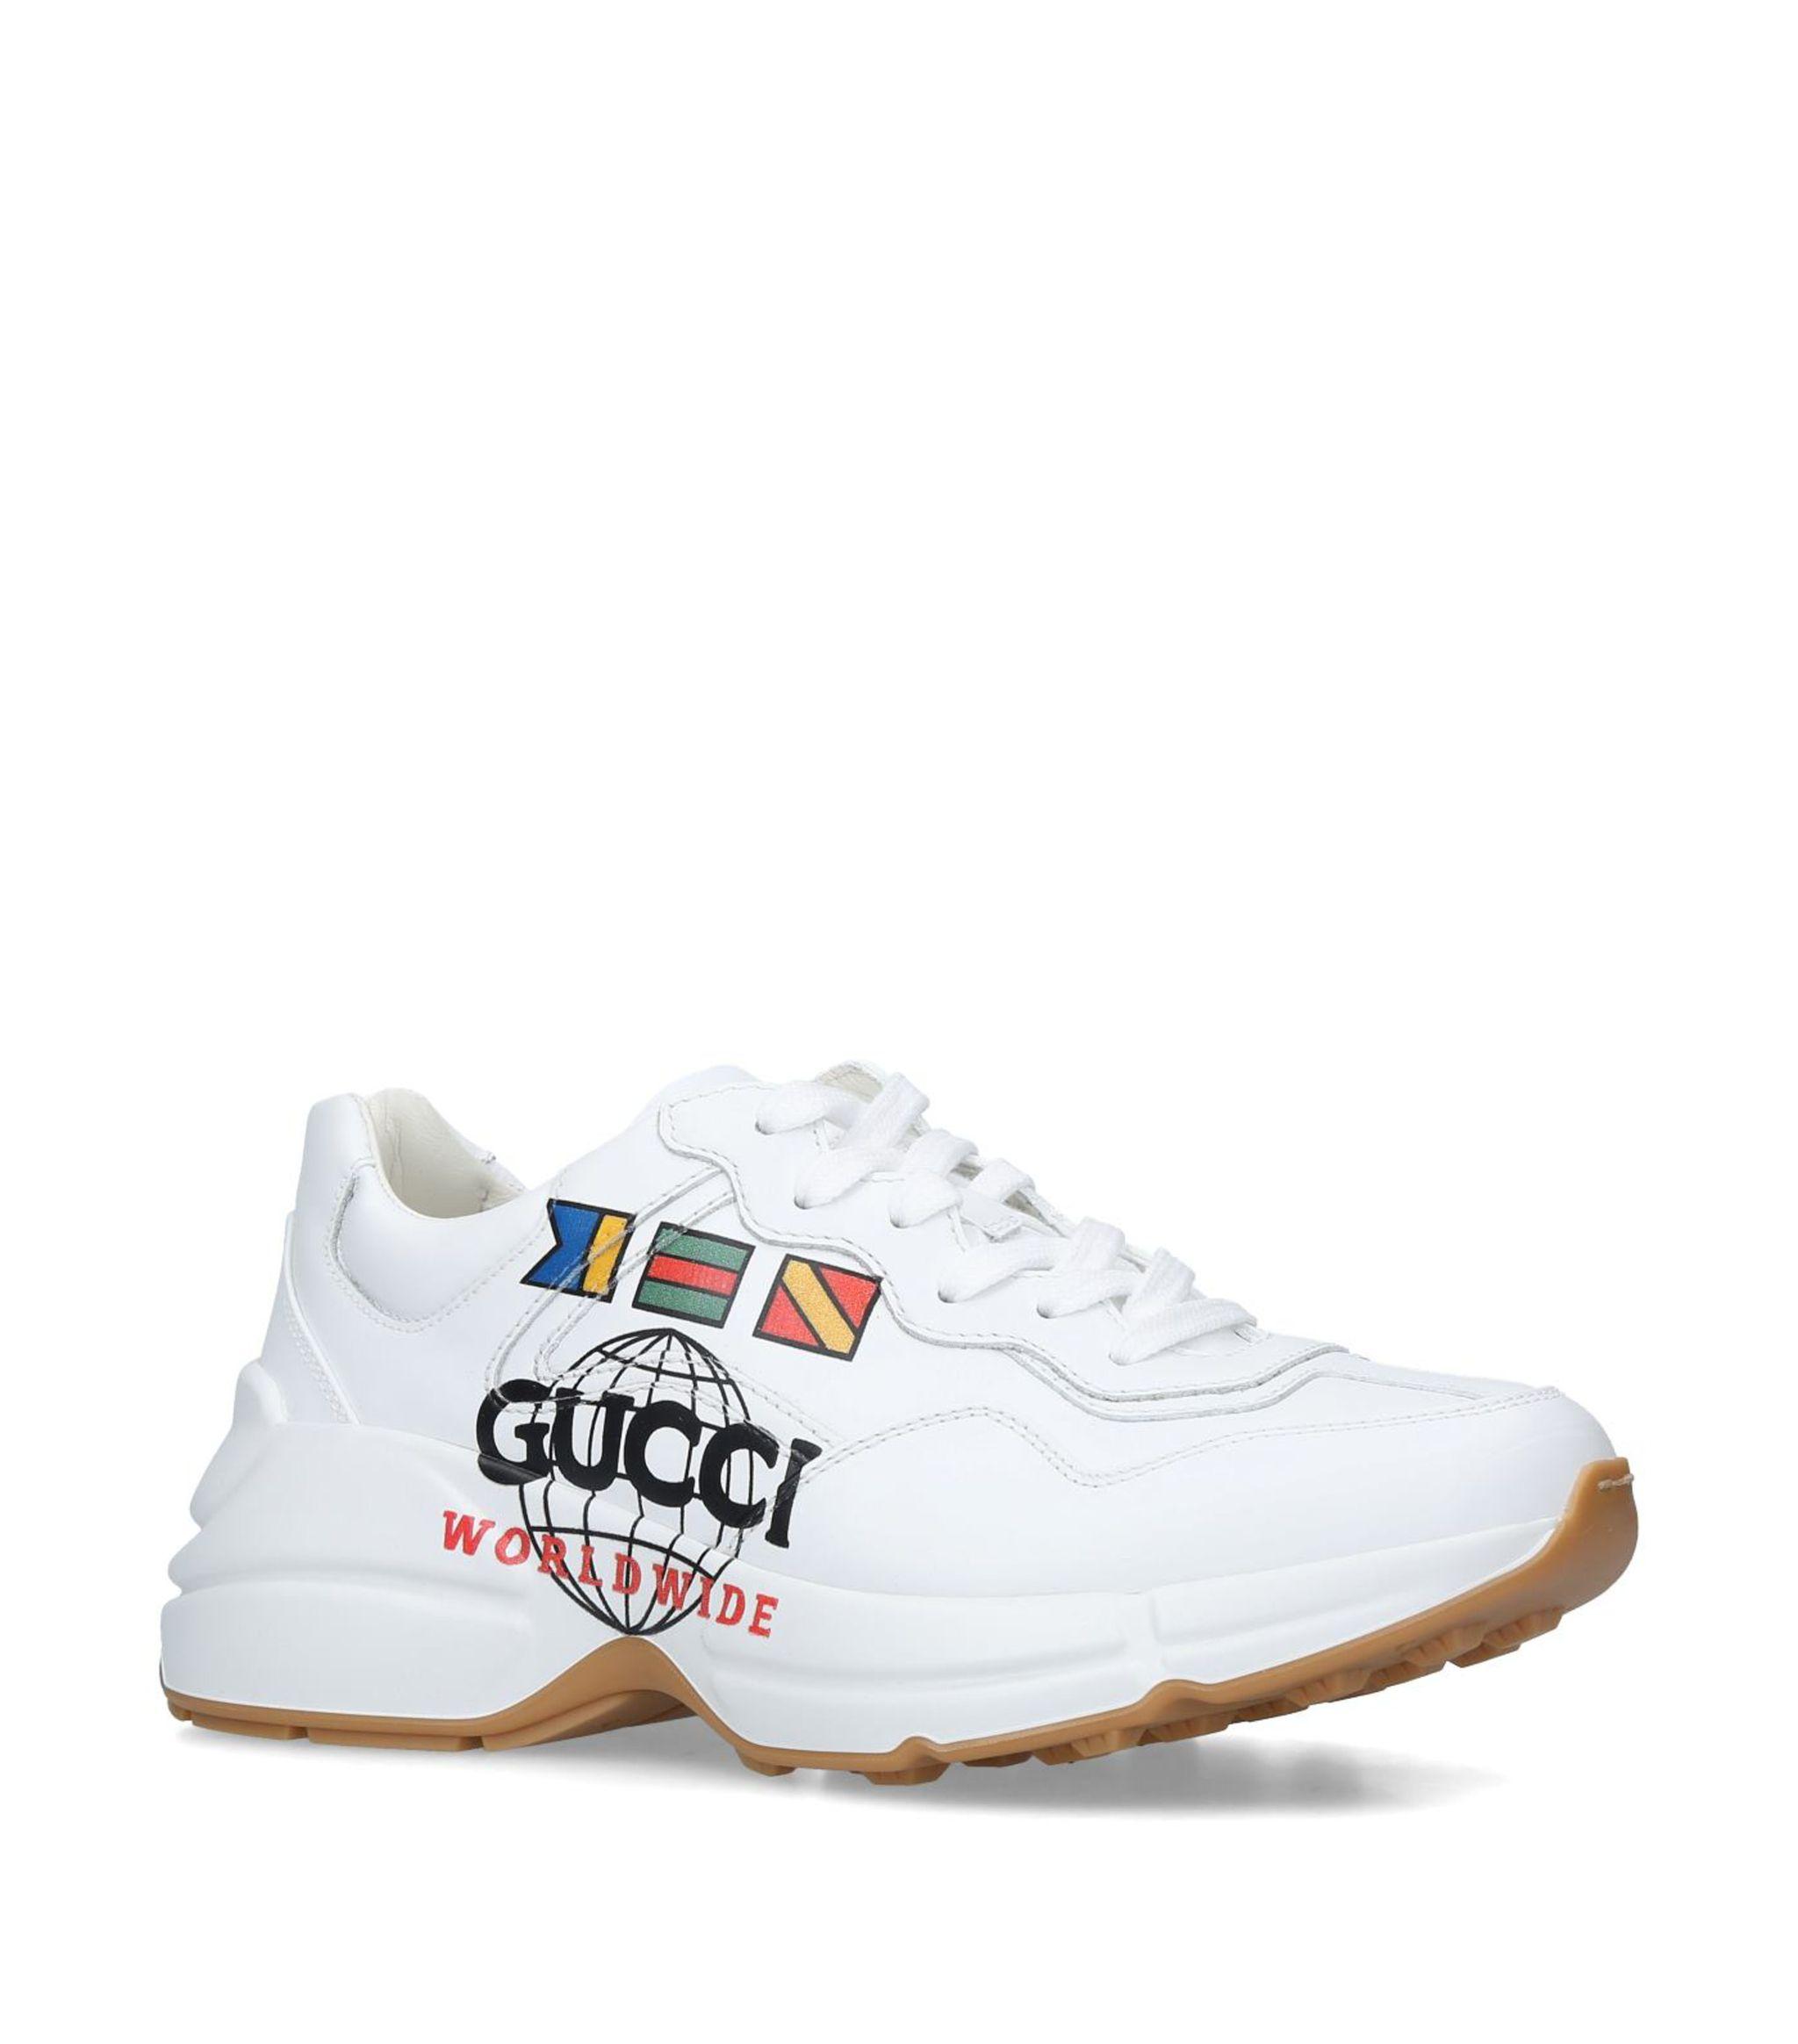 Gucci Leather Rhyton Worldwide Sneaker in White - Save 32% - Lyst